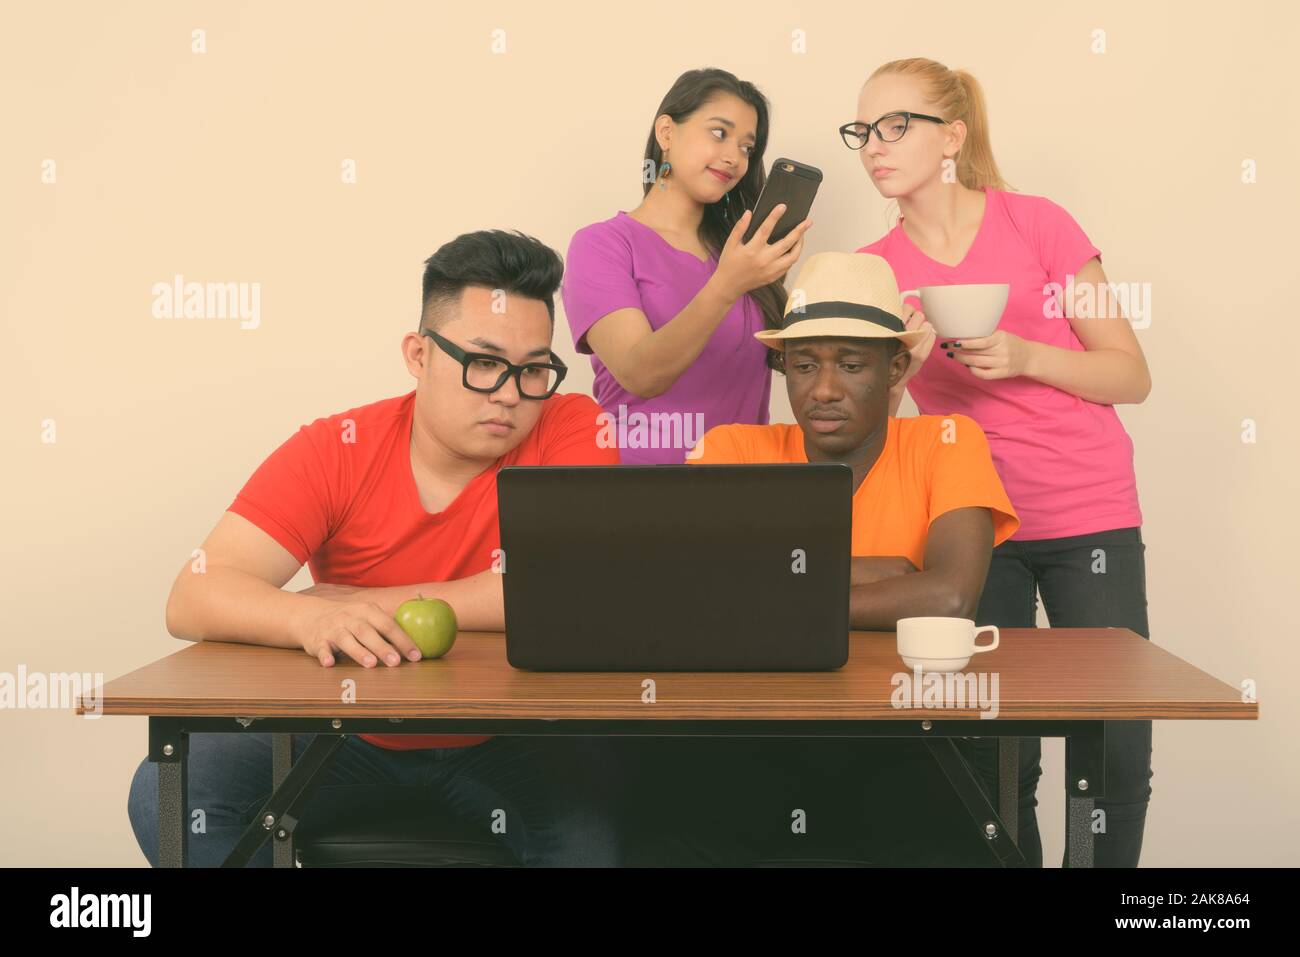 Diverse multi ethnic group of friends working with laptop and phone together Stock Photo